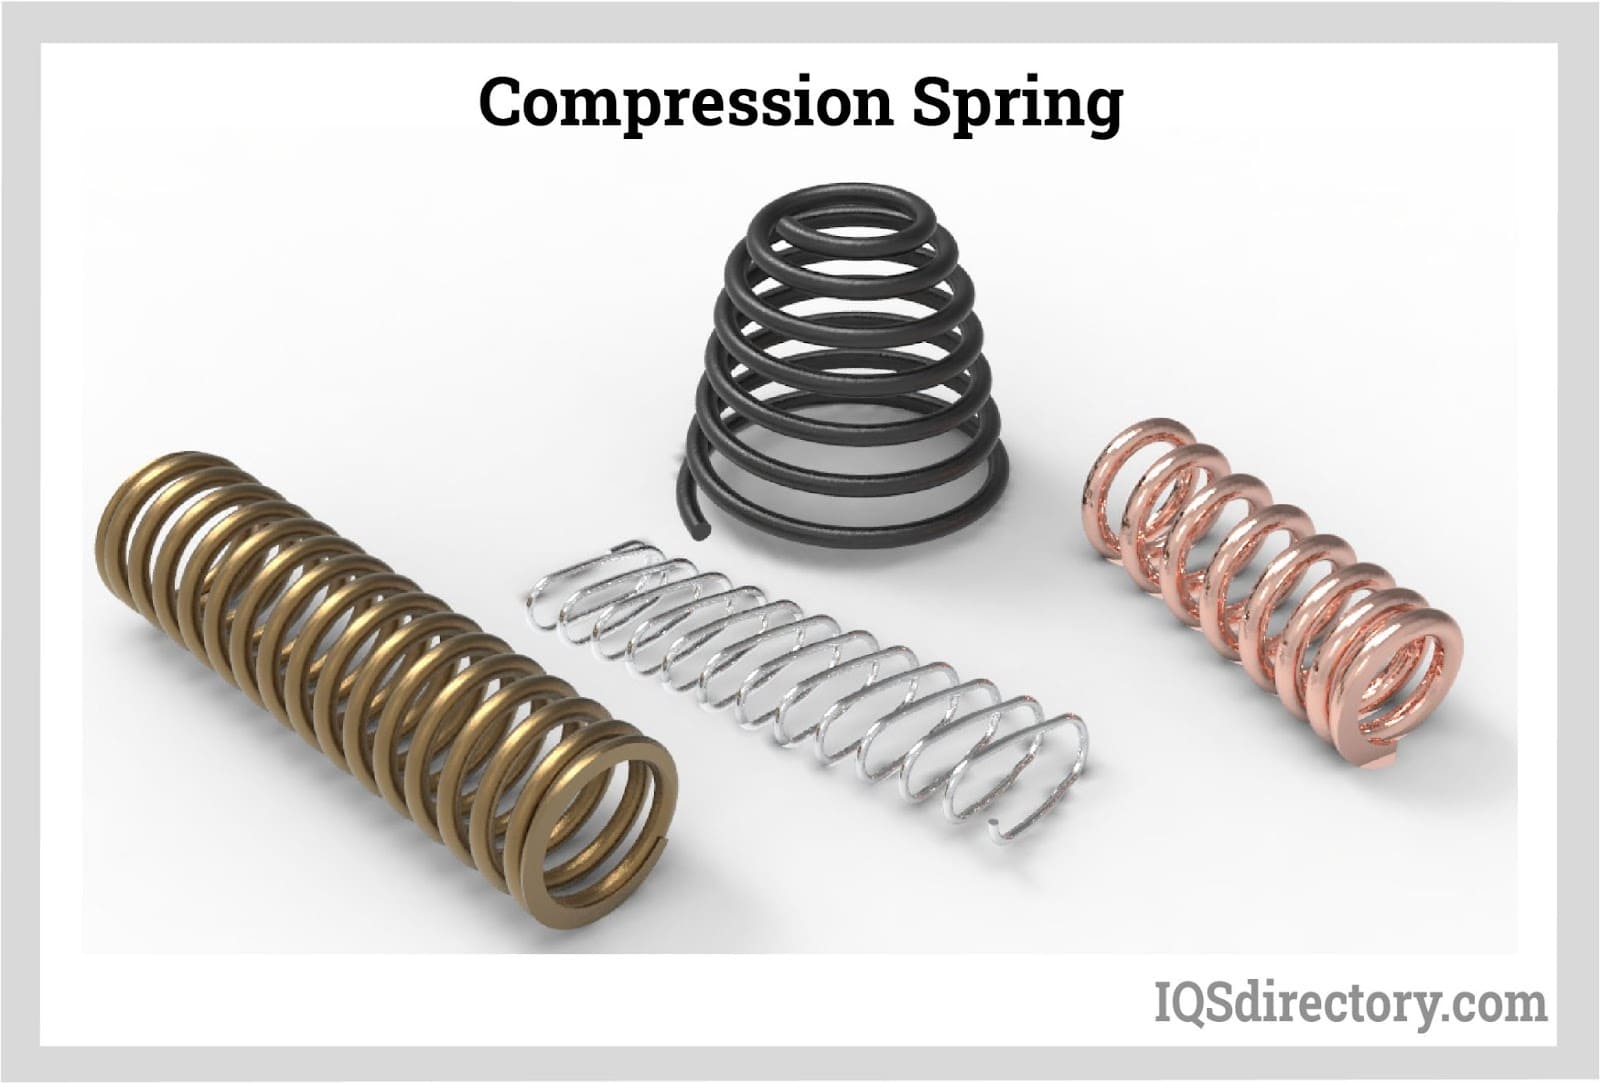 What are Mechanical Springs and their types